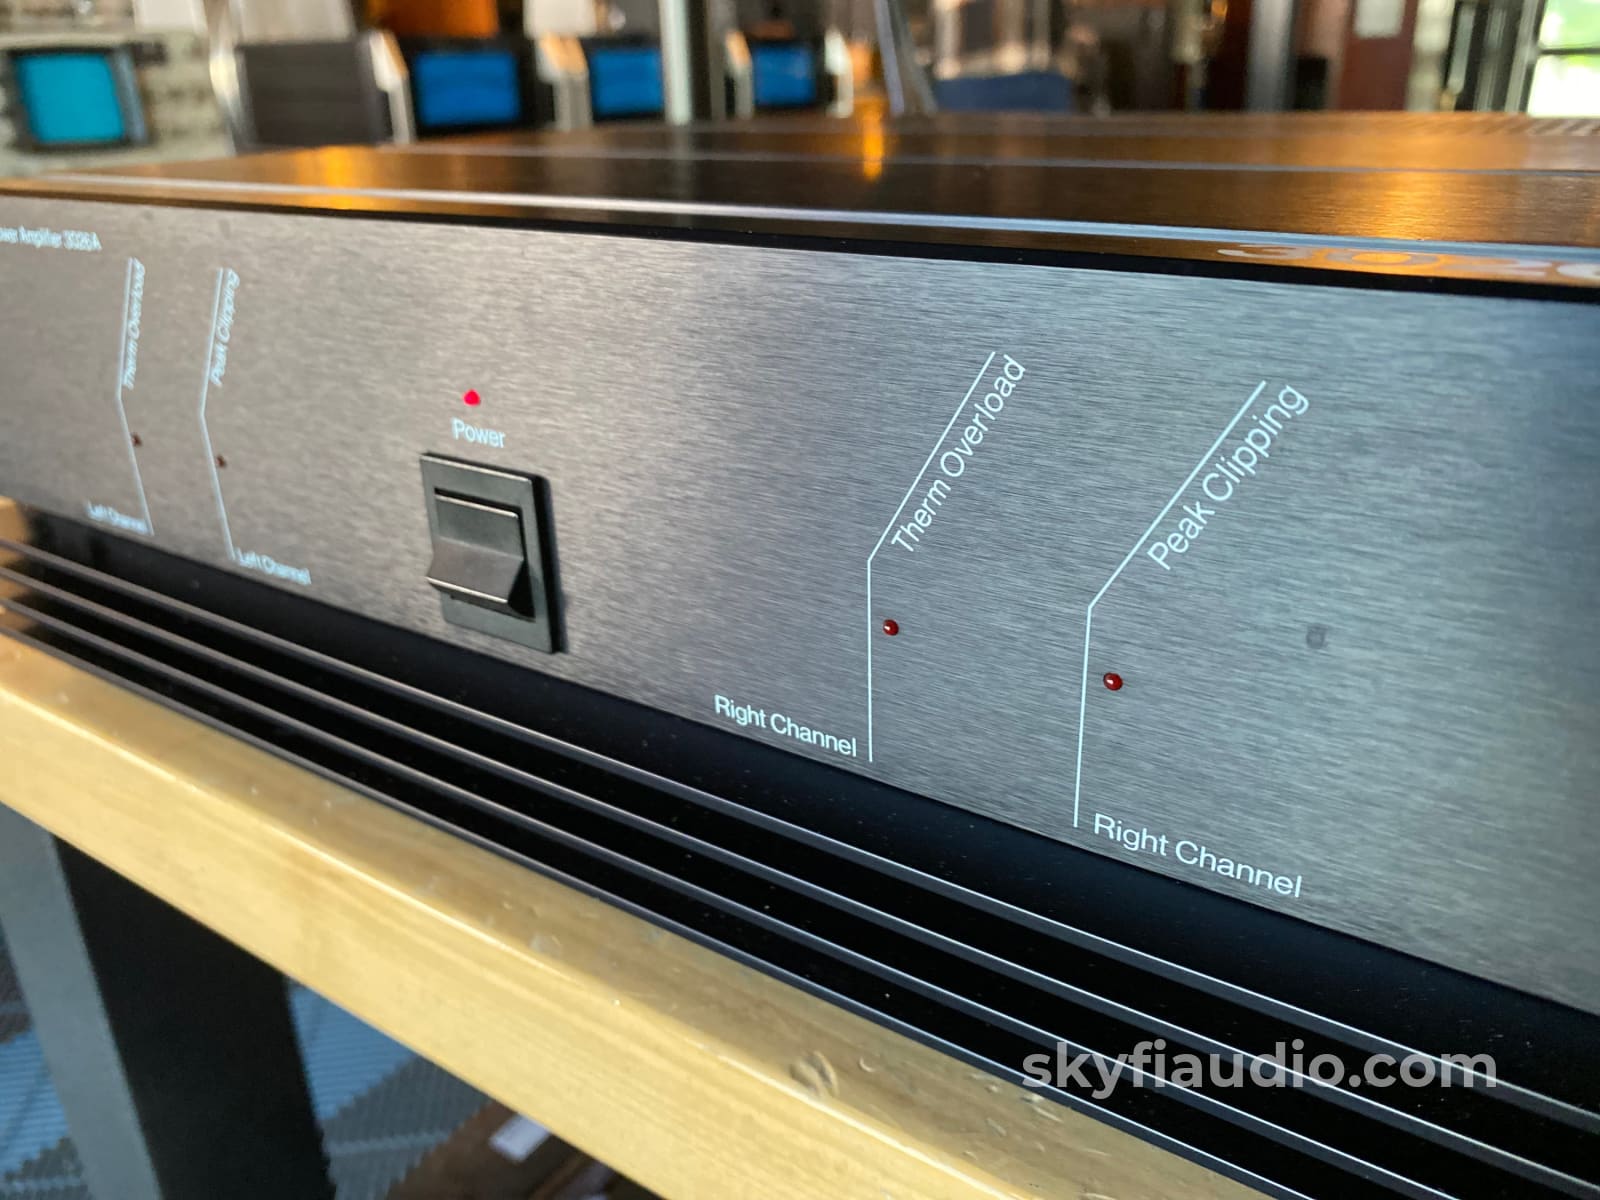 Tandberg 3026A Amplifier From Norway - 150W